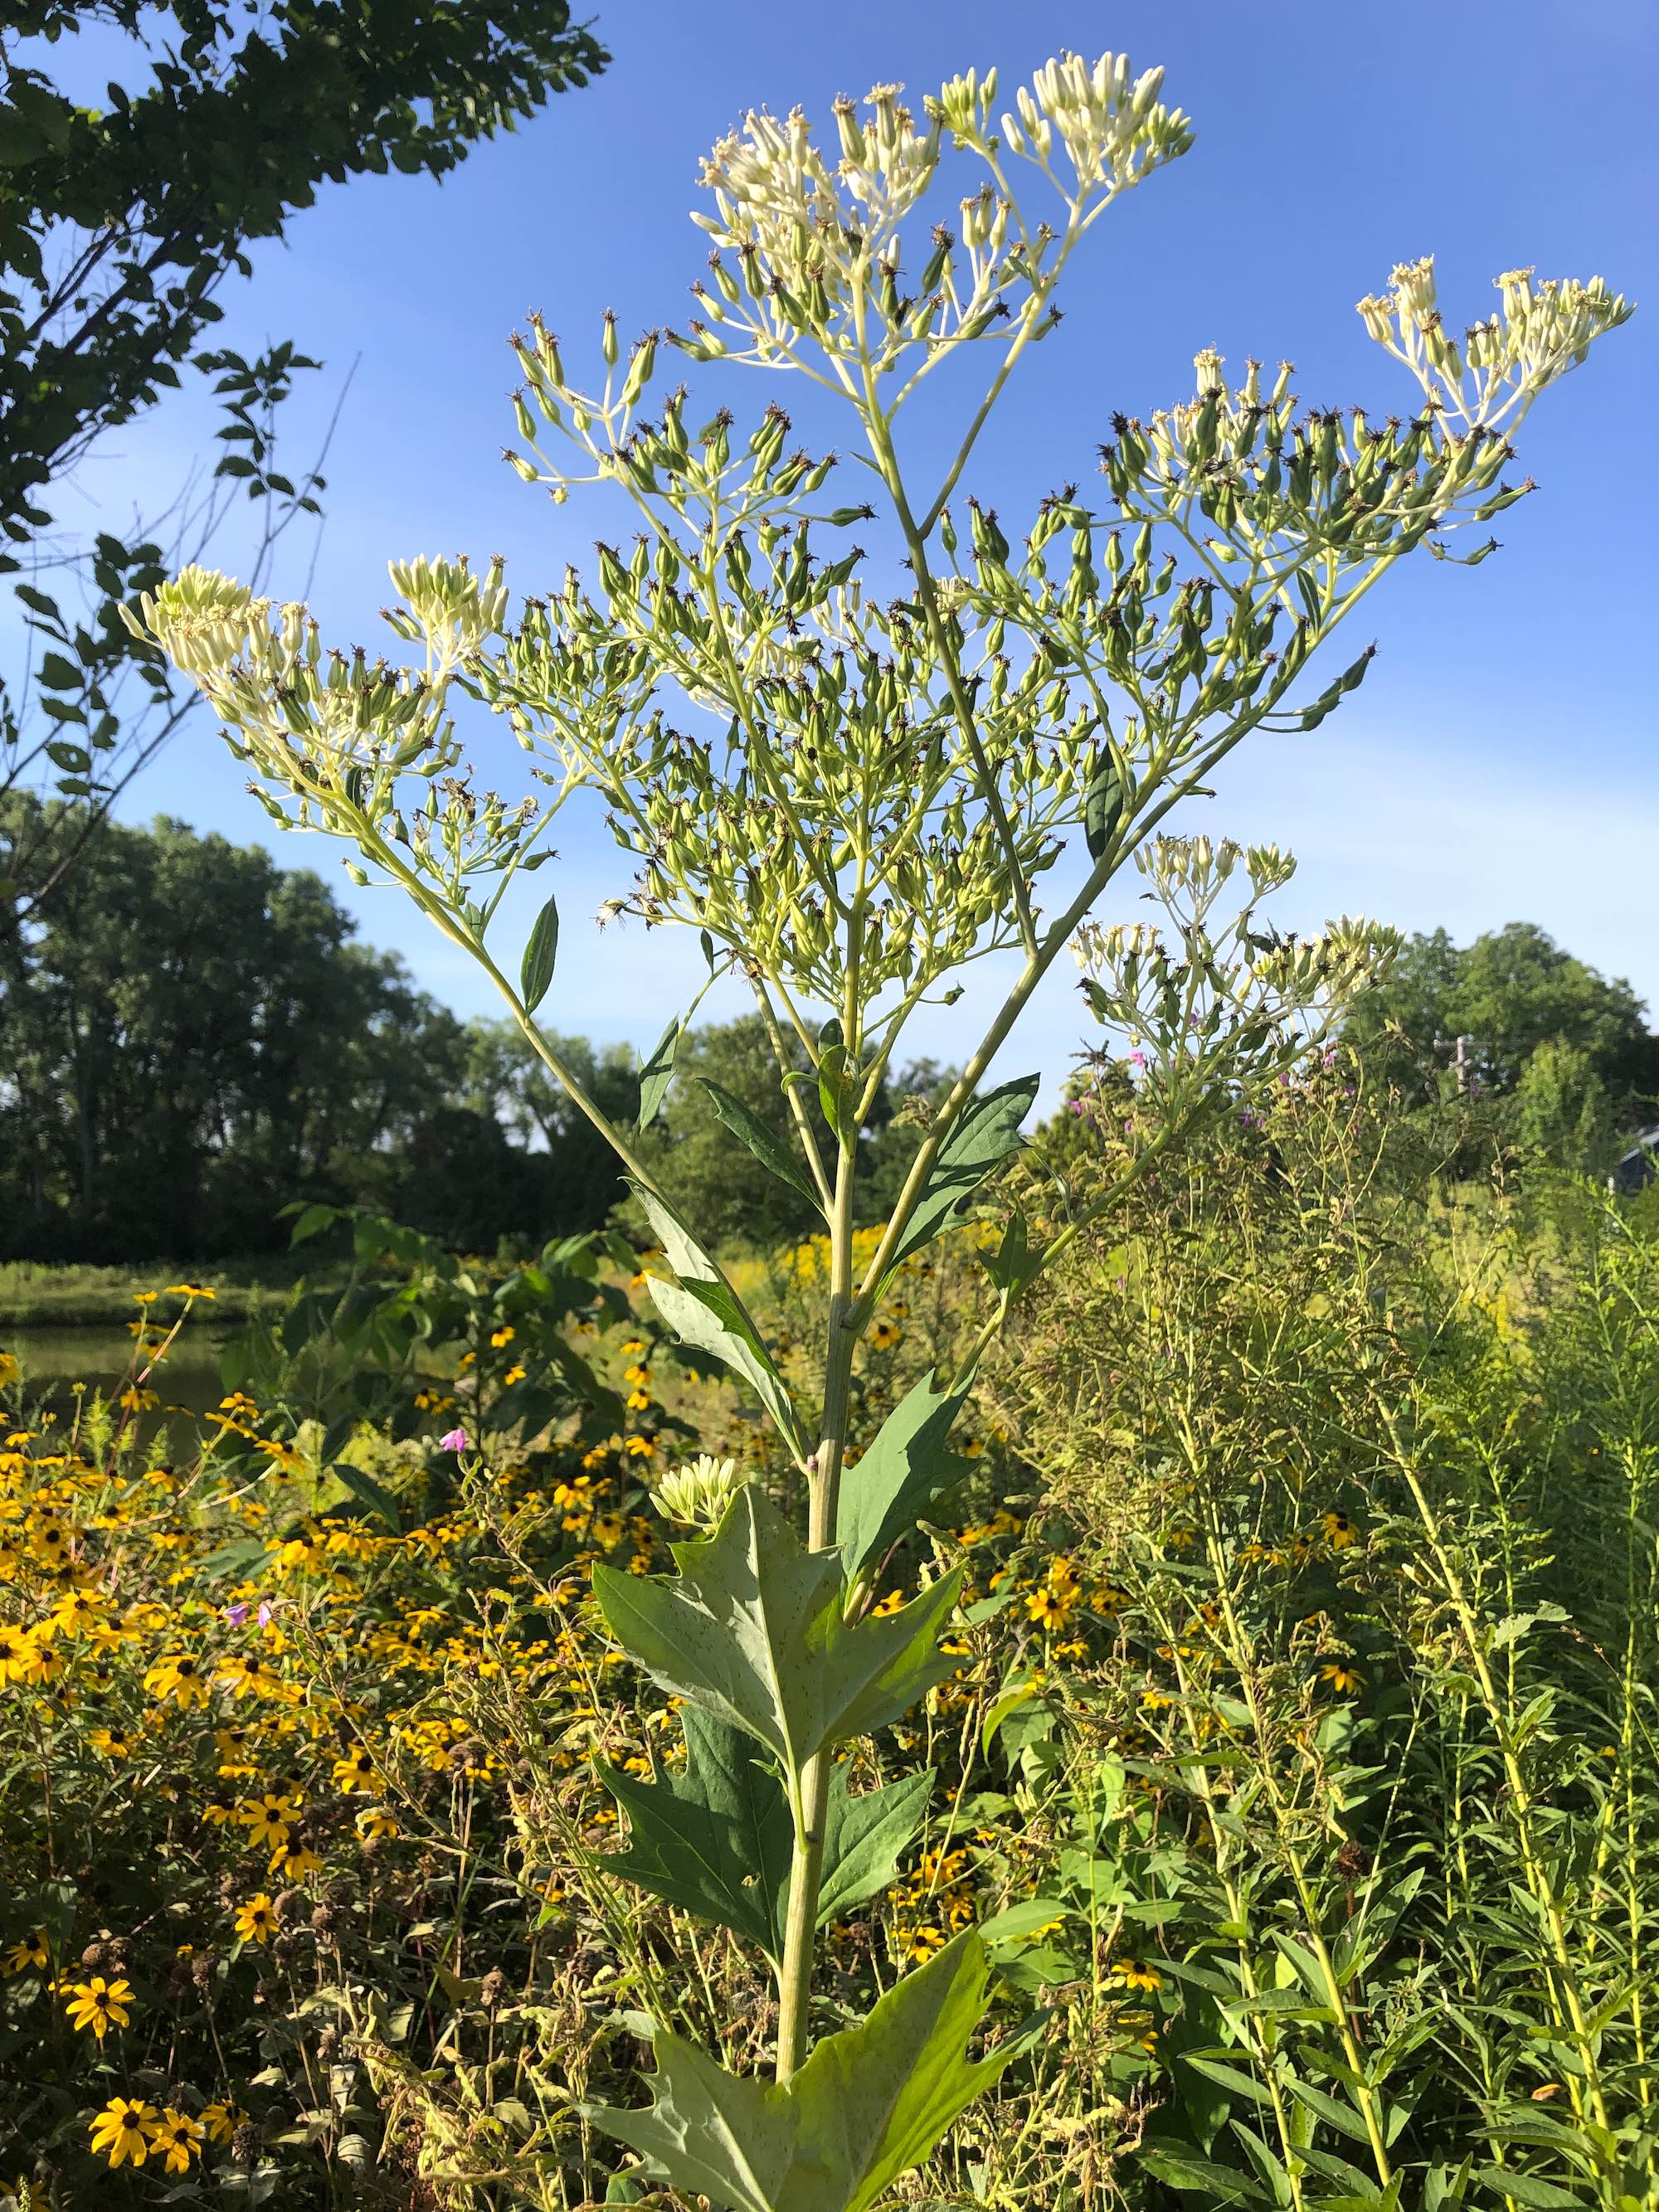 Pale Indian Plantain on bank of retaining pond on corner of Nakoma Road and Manitou Way in Madison, Wisconsin on August 21, 2019.